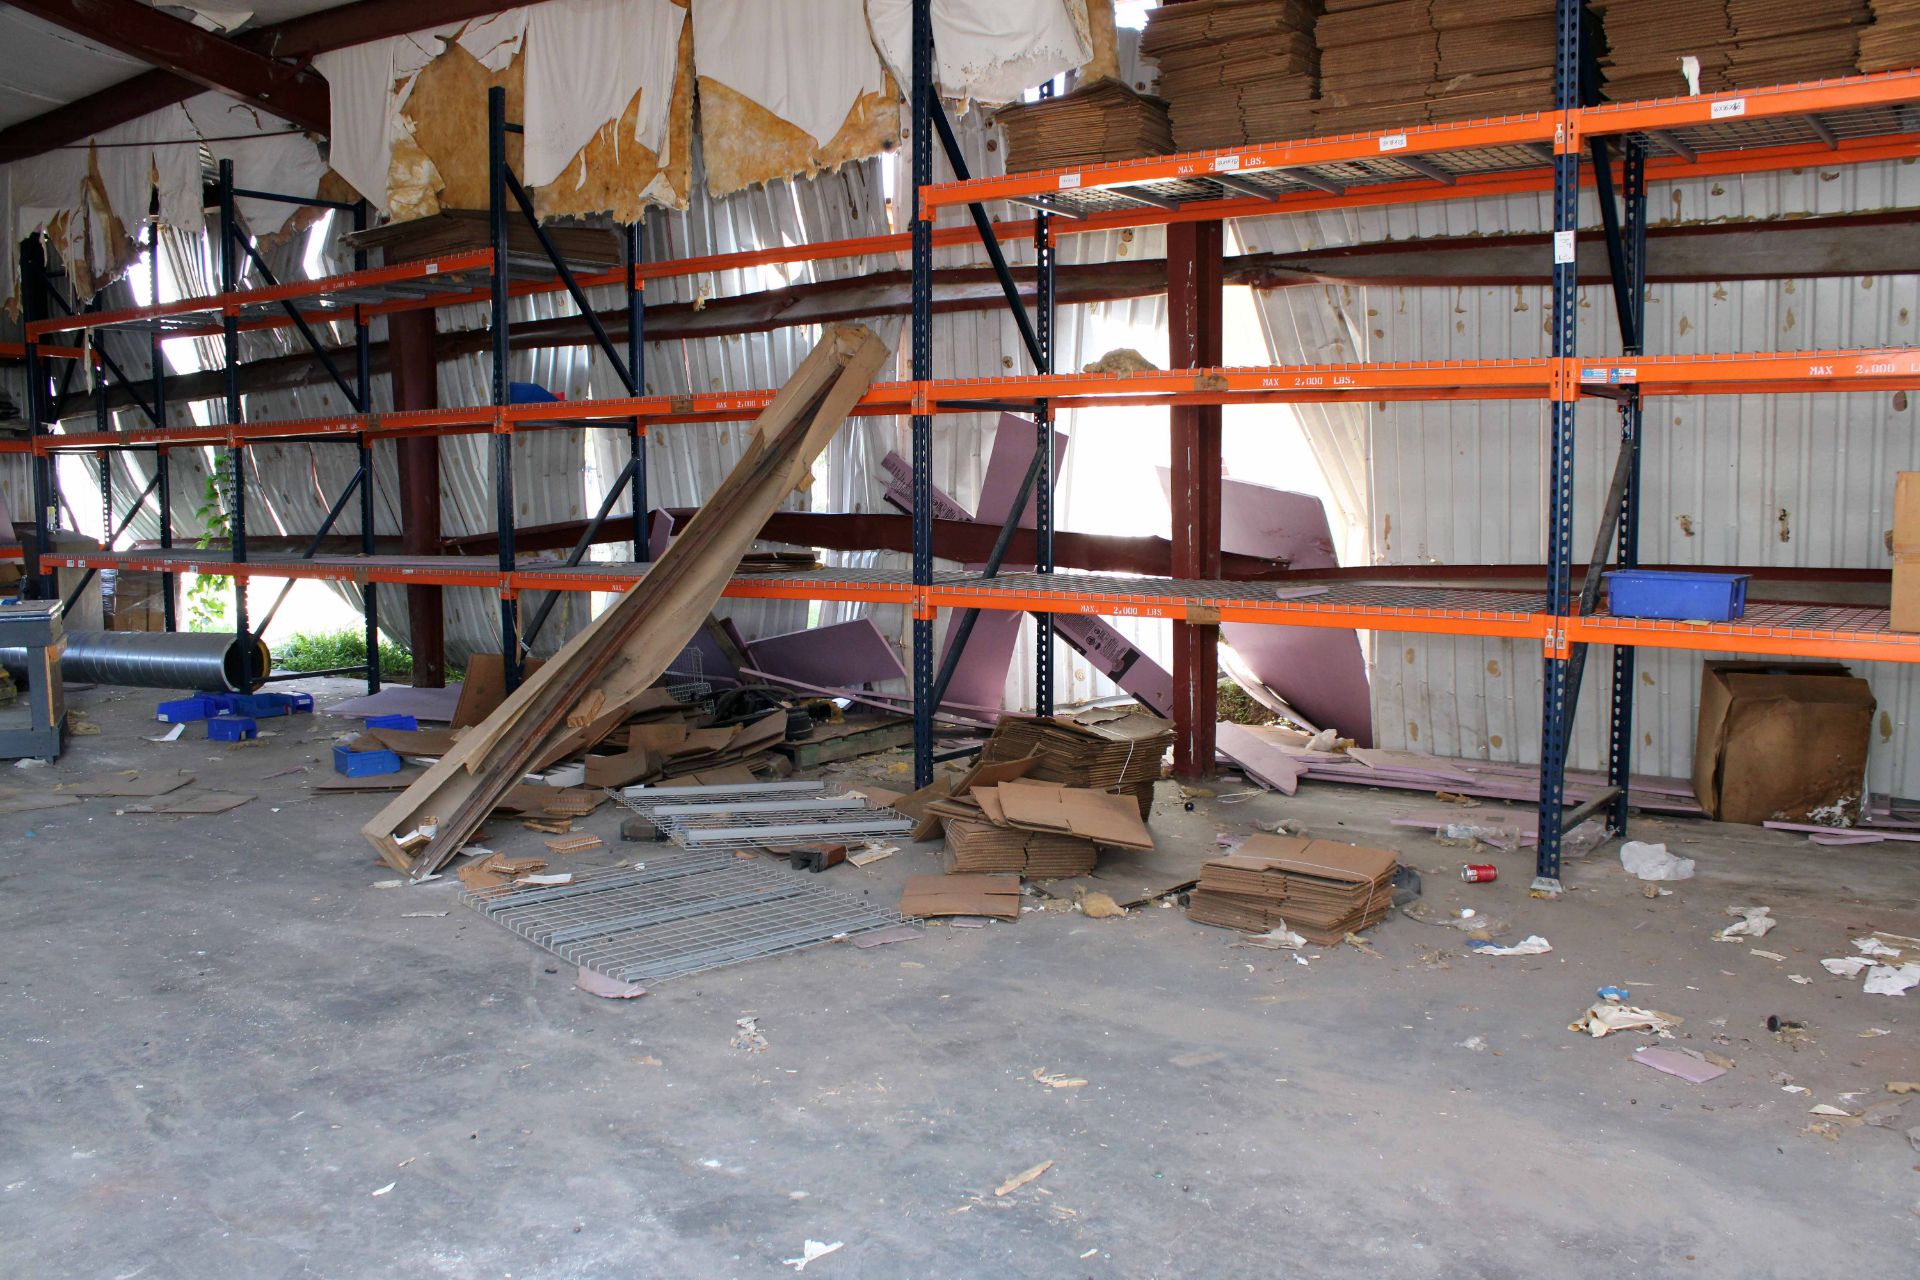 LOT OF PALLET RACK SECTIONS (10) (located at back building)